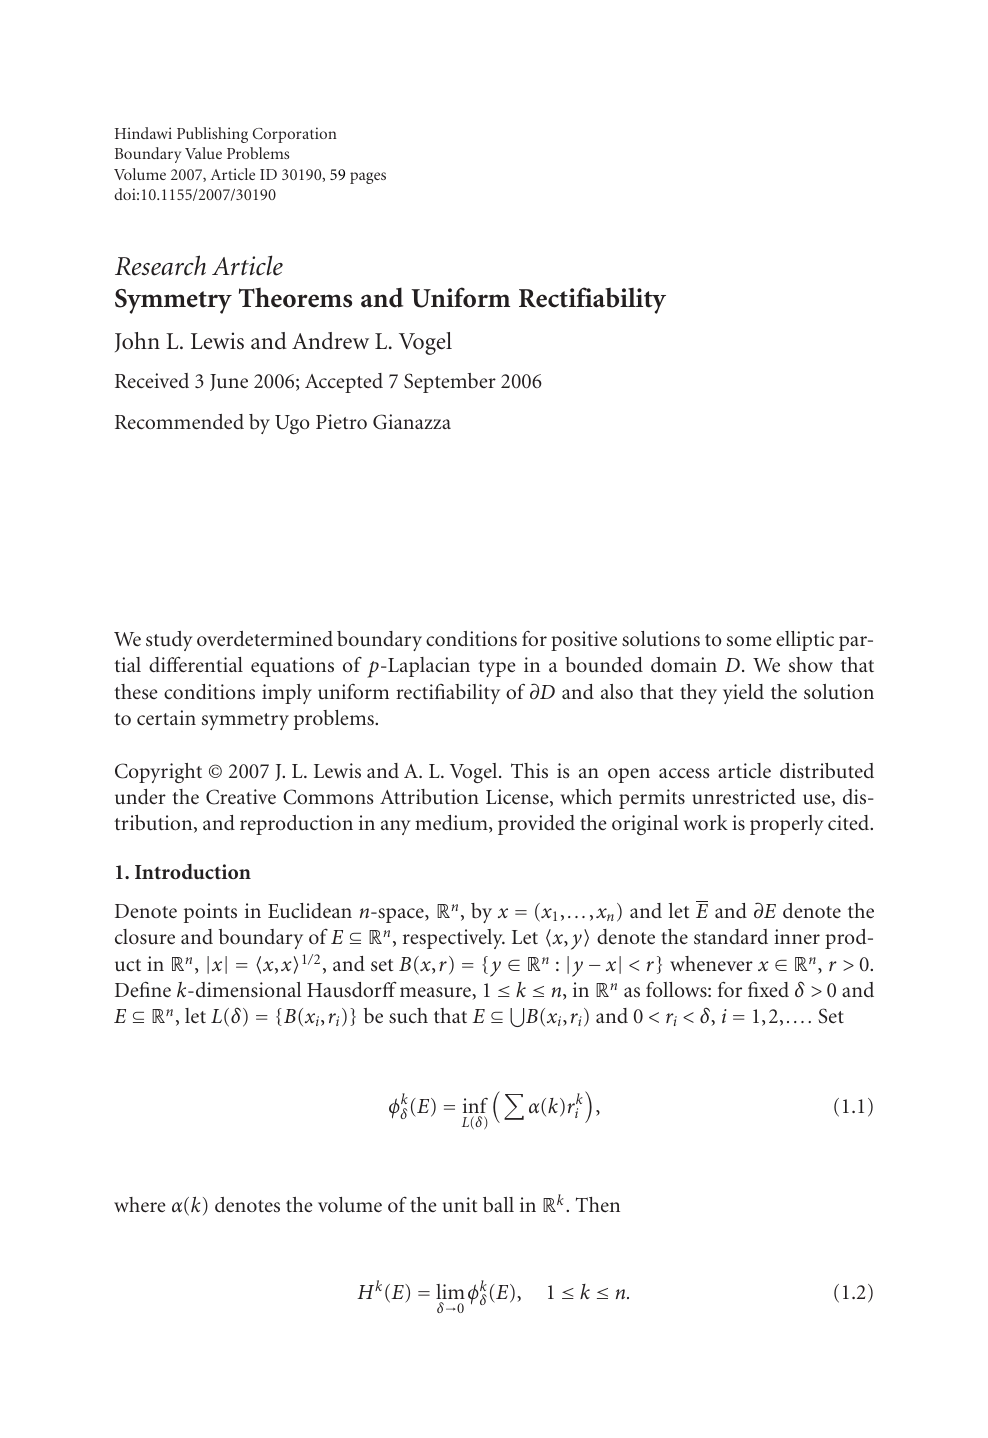 Symmetry Theorems And Uniform Rectifiability Topic Of Research Paper In Mathematics Download Scholarly Article Pdf And Read For Free On Cyberleninka Open Science Hub